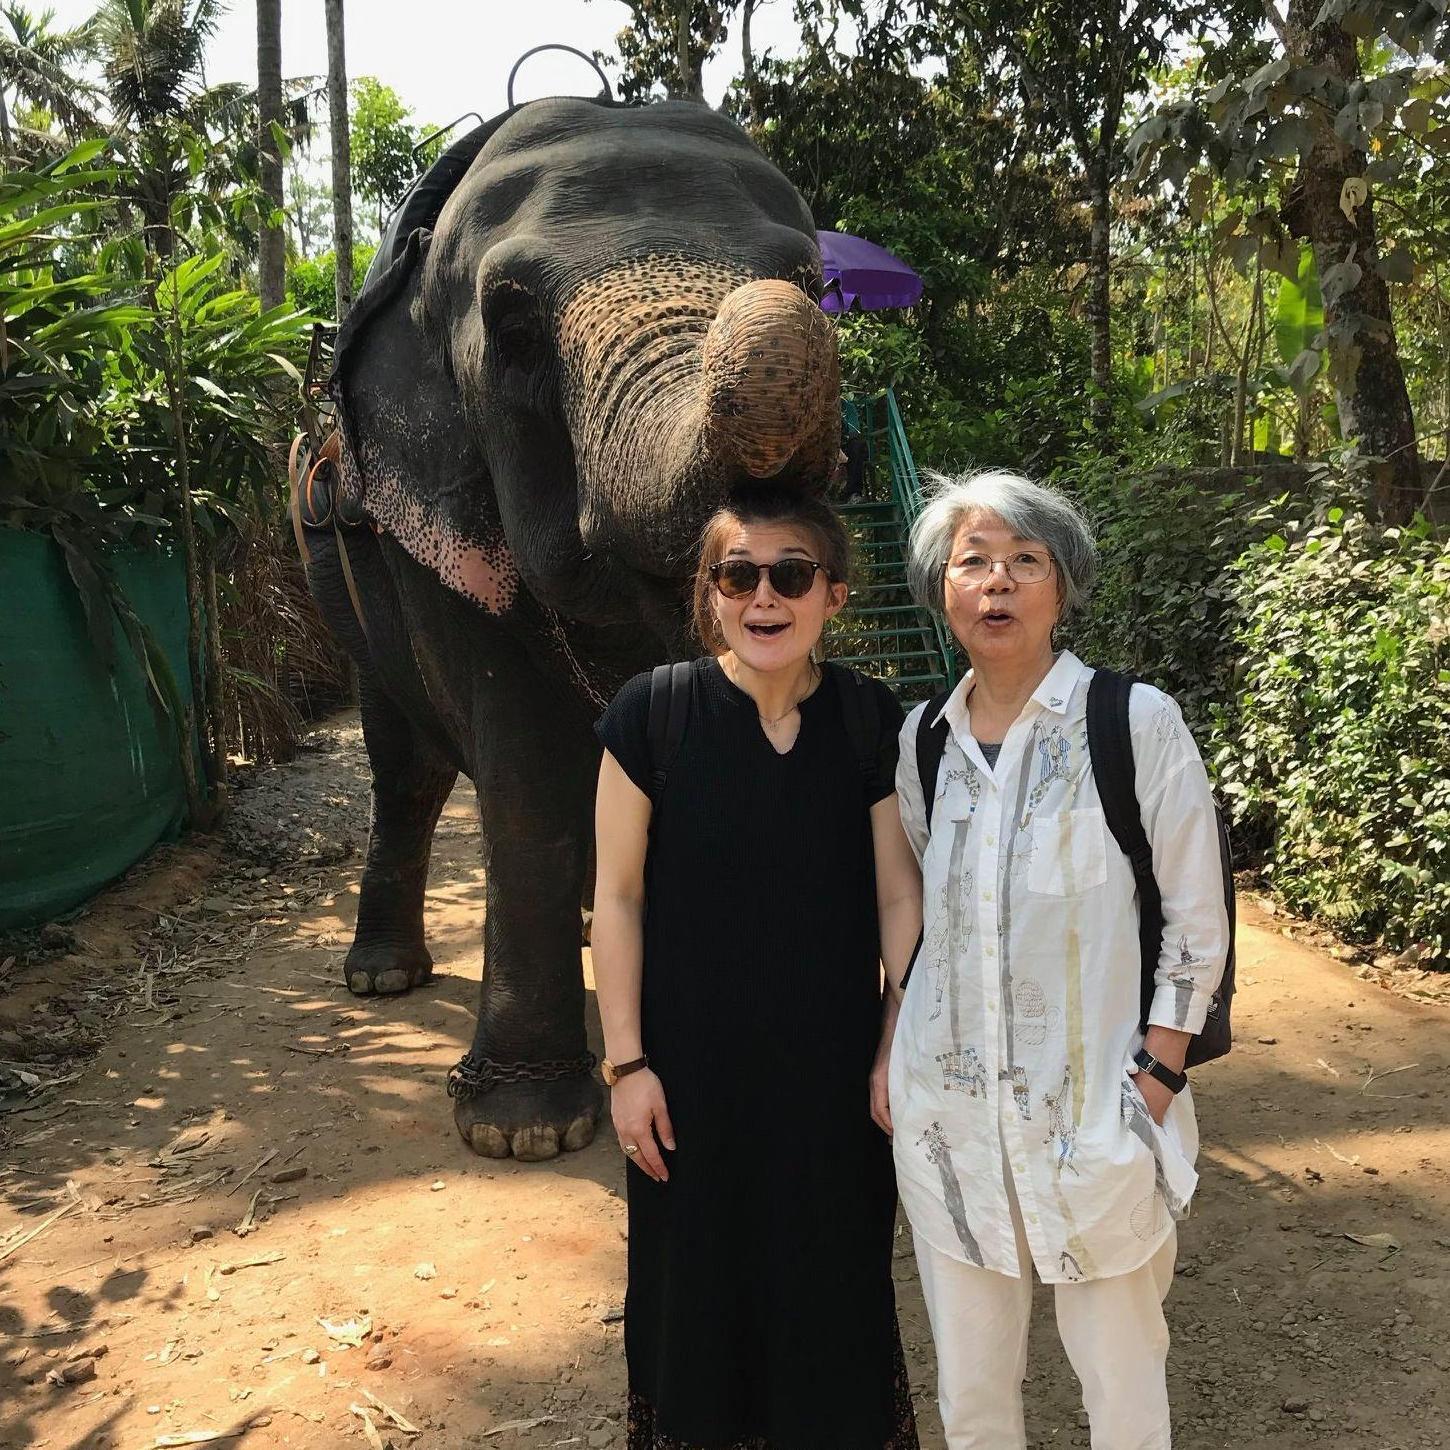 Leah with her family friend Keiko in India ~February, 2020